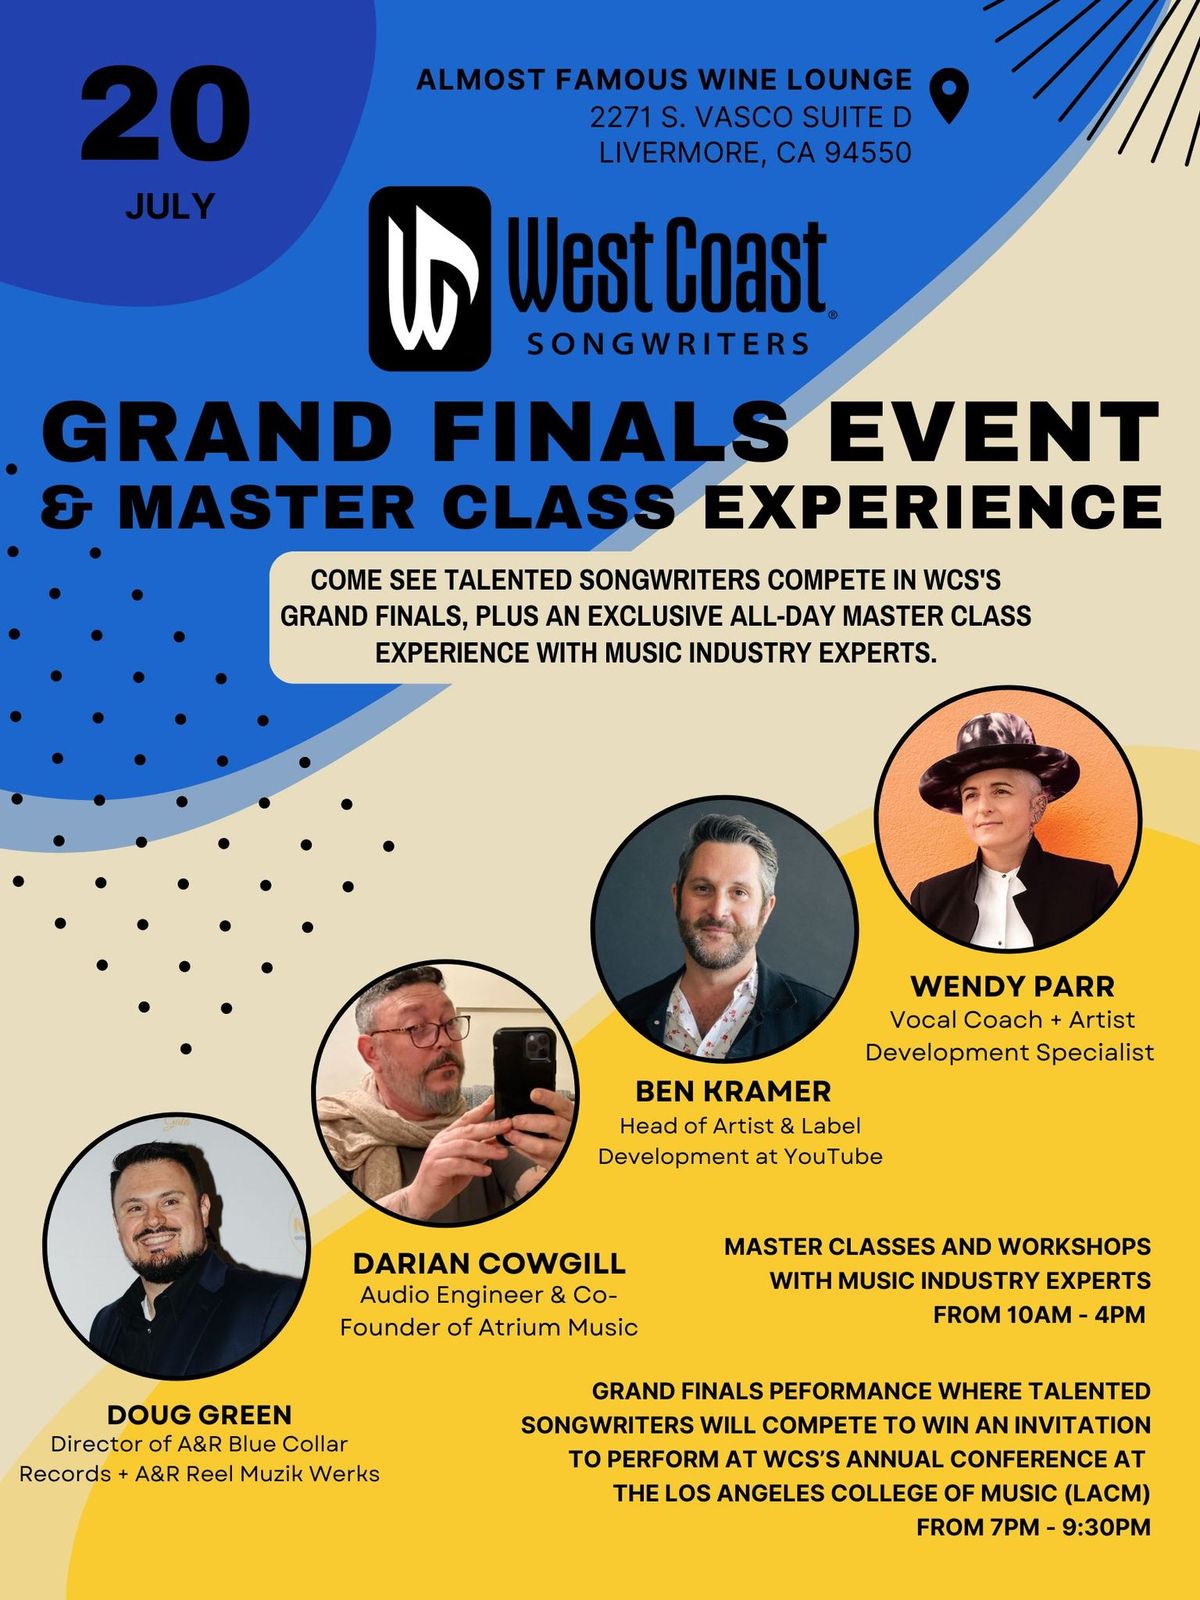 West Coast Songwriters Grand Finals & Masterclass Experience